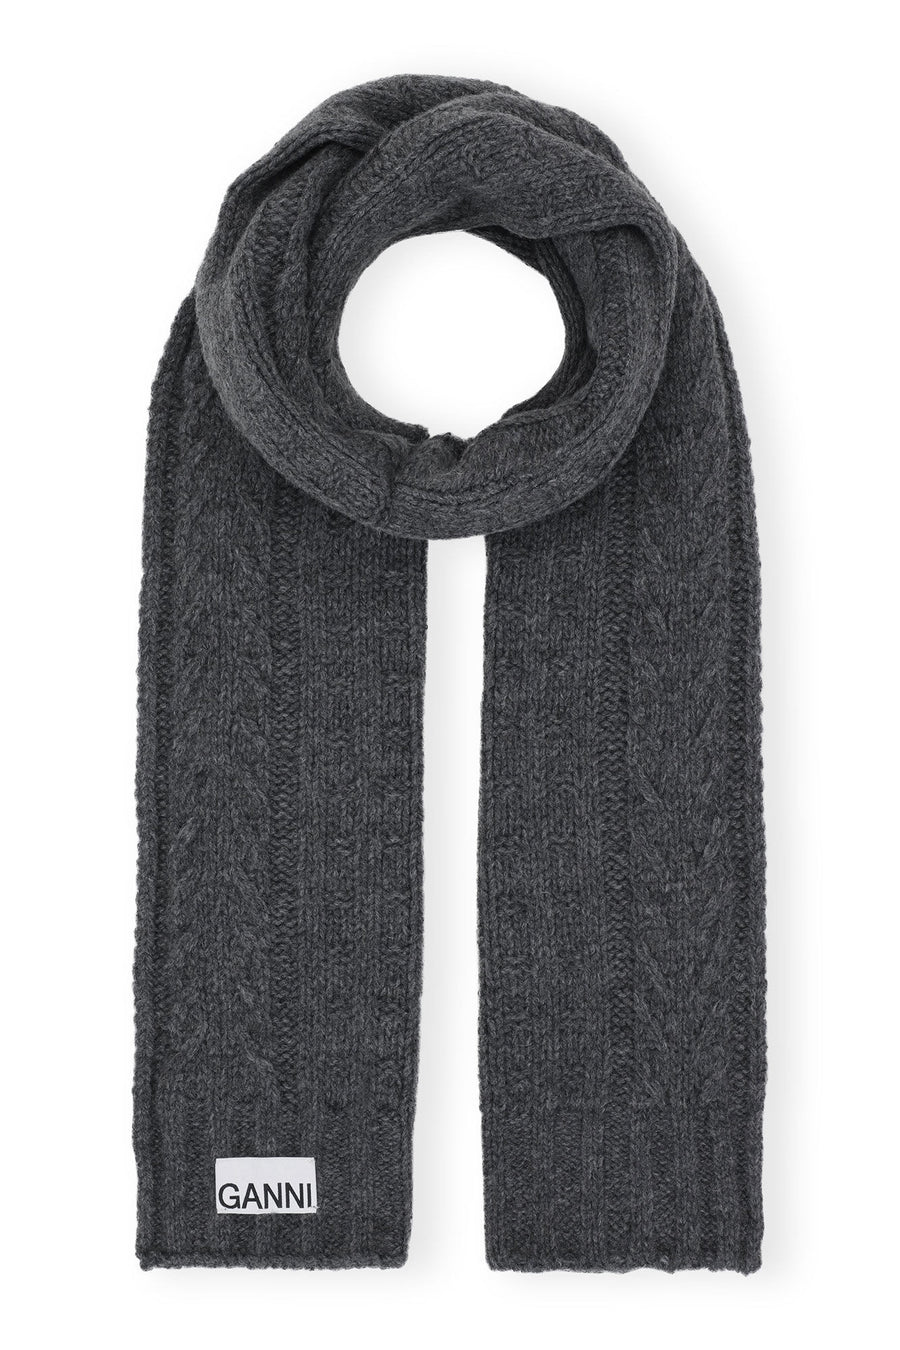 Ganni Cable Scarf